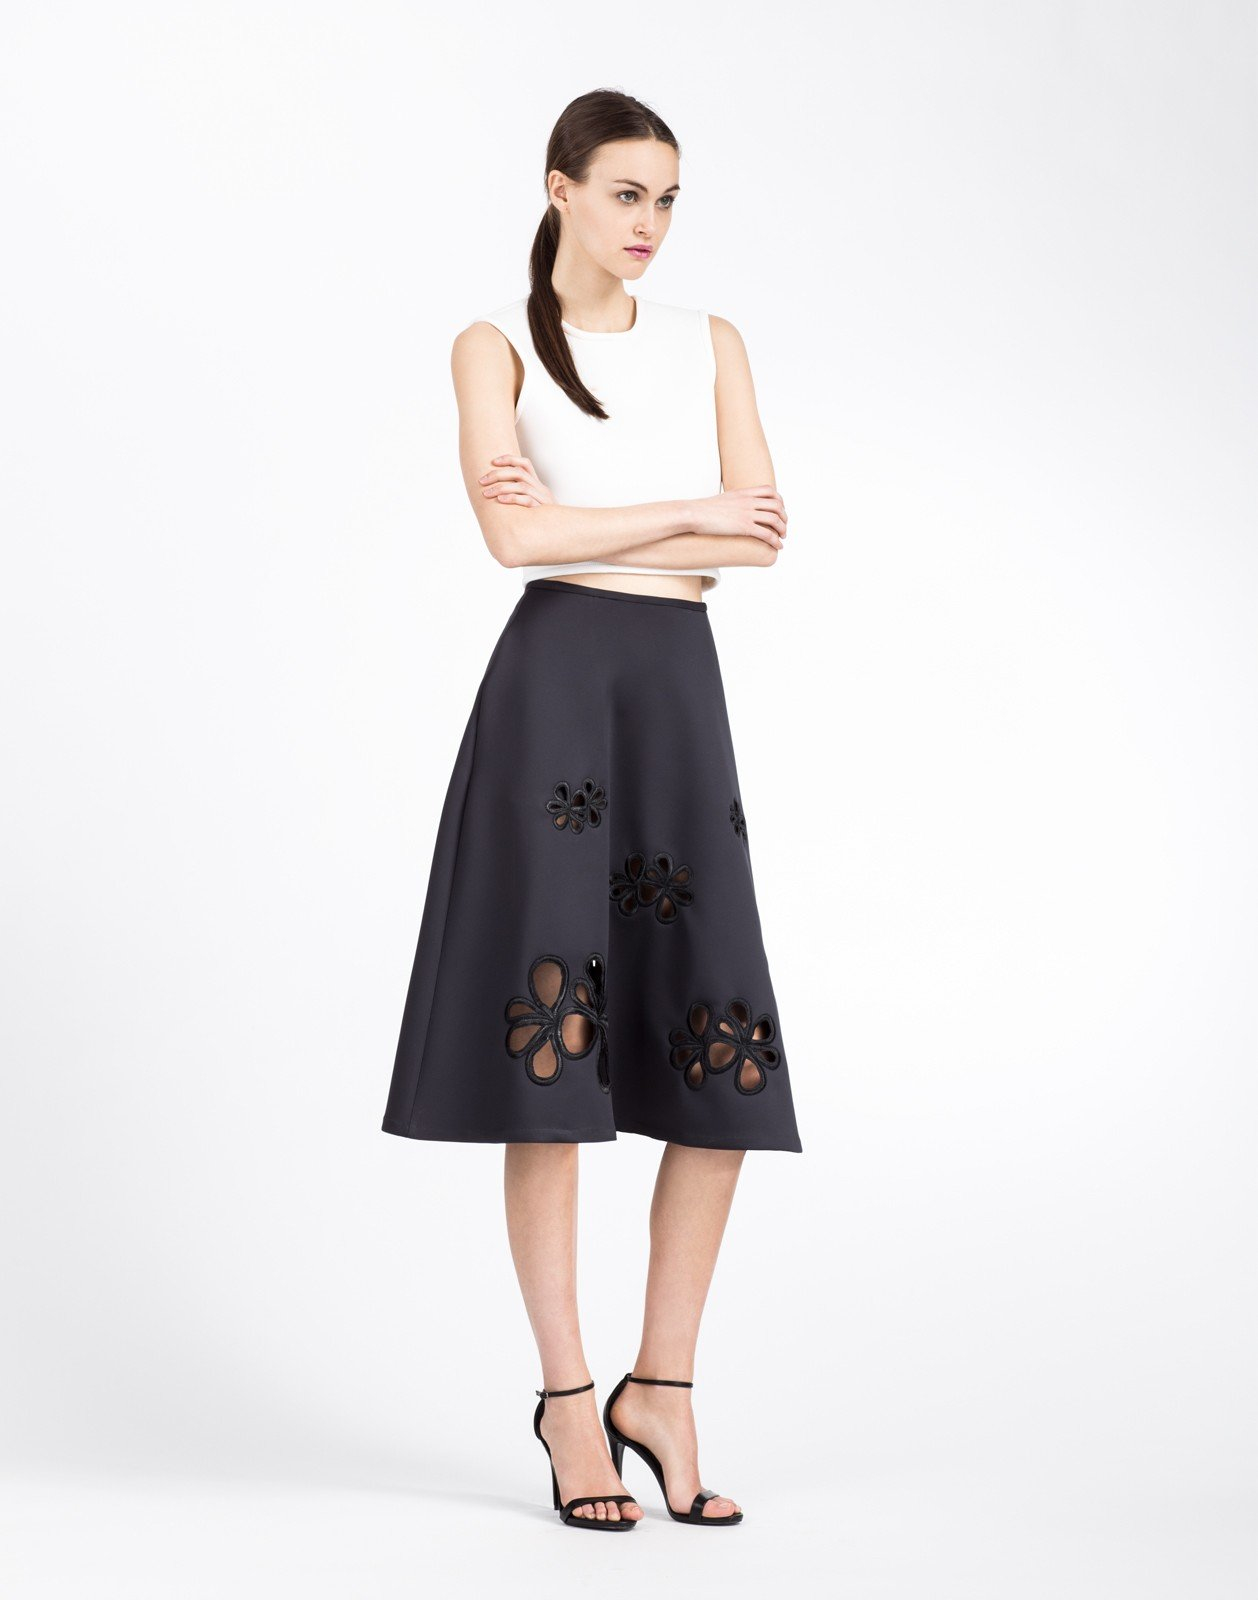 Lyst - Cynthia Rowley Bonded Embroidered Applique Midi Skirt in Black